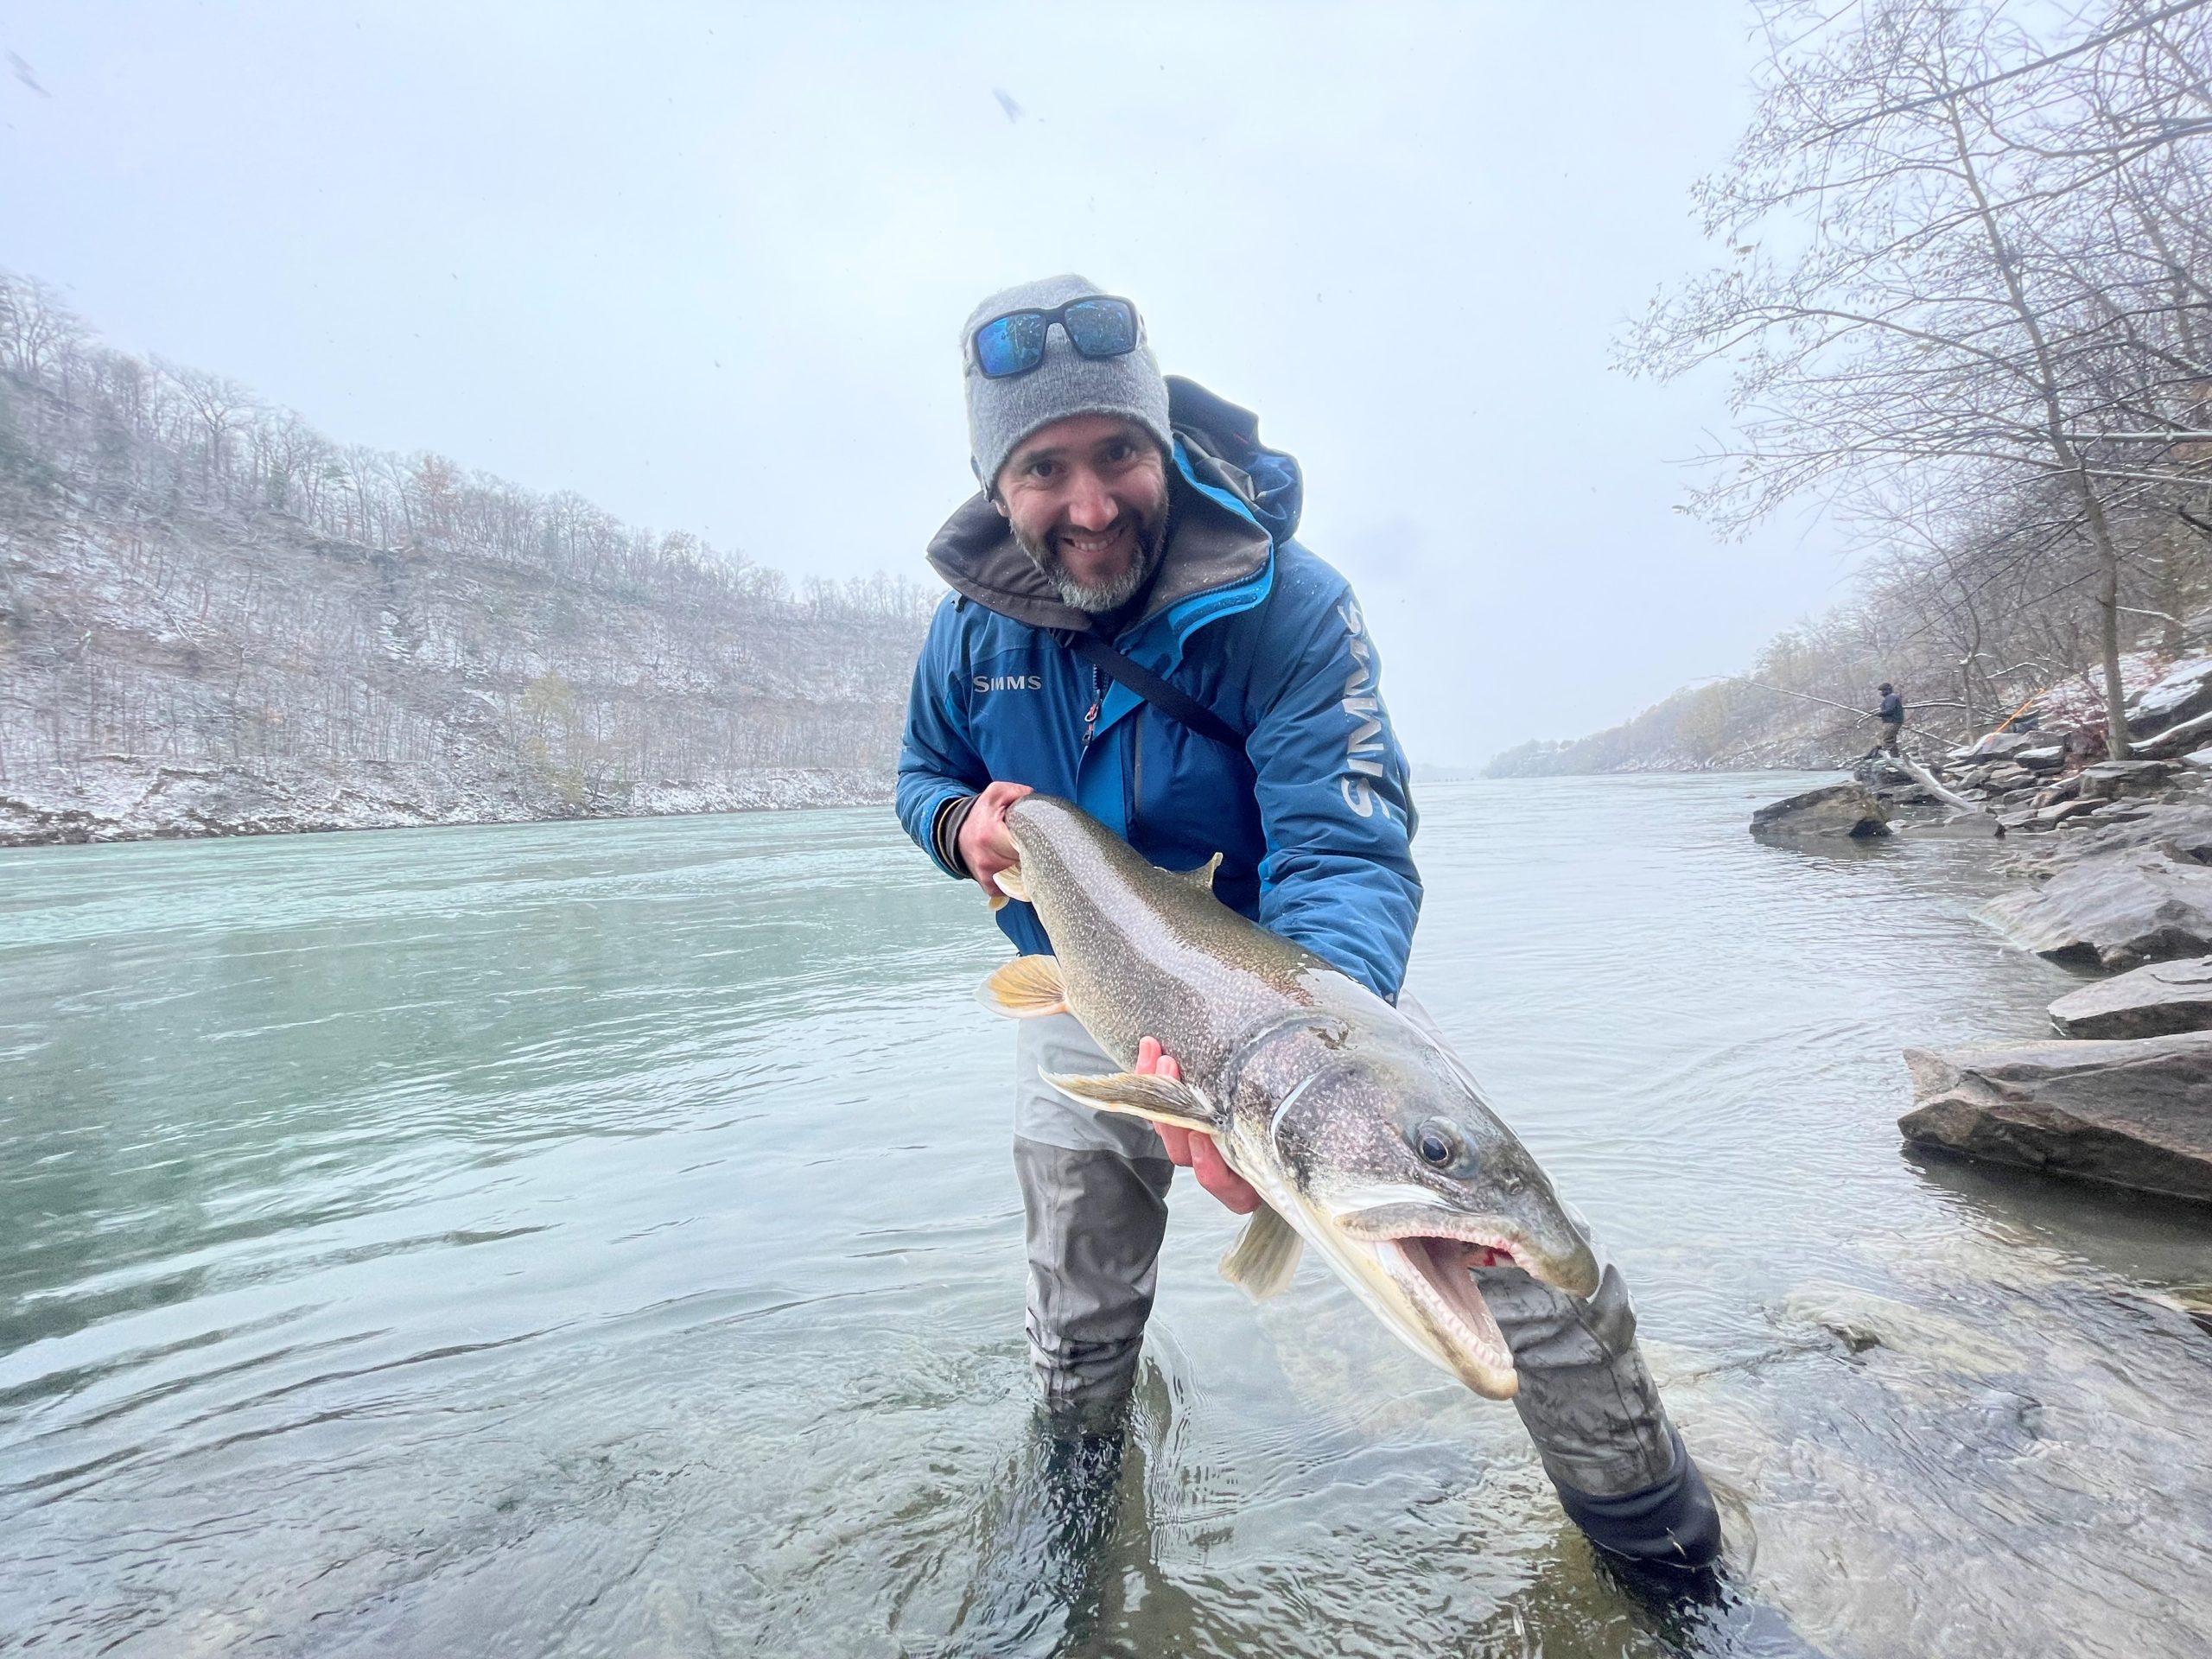 Winter Wading: Tips for Staying Warm - The Fisherman